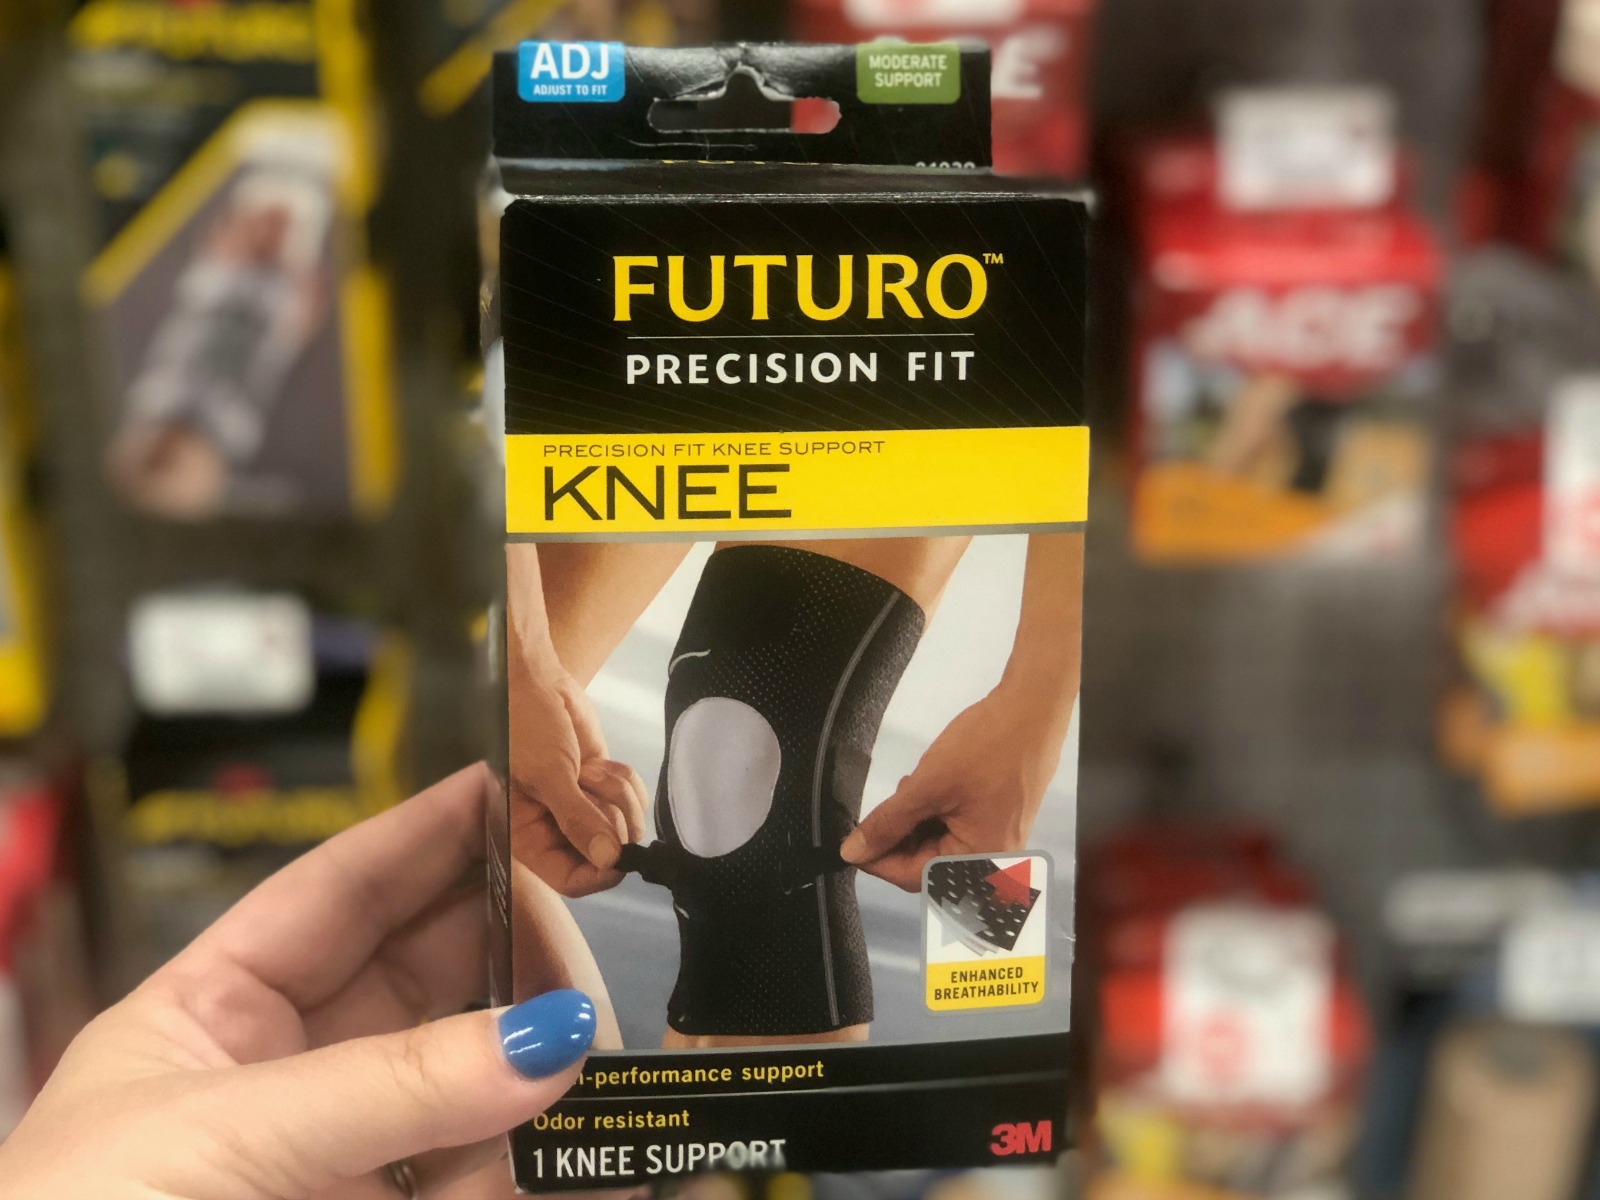 Look For Futuro™ Supports & Braces At Publix - Find Products To Help You Be Your Best on I Heart Publix